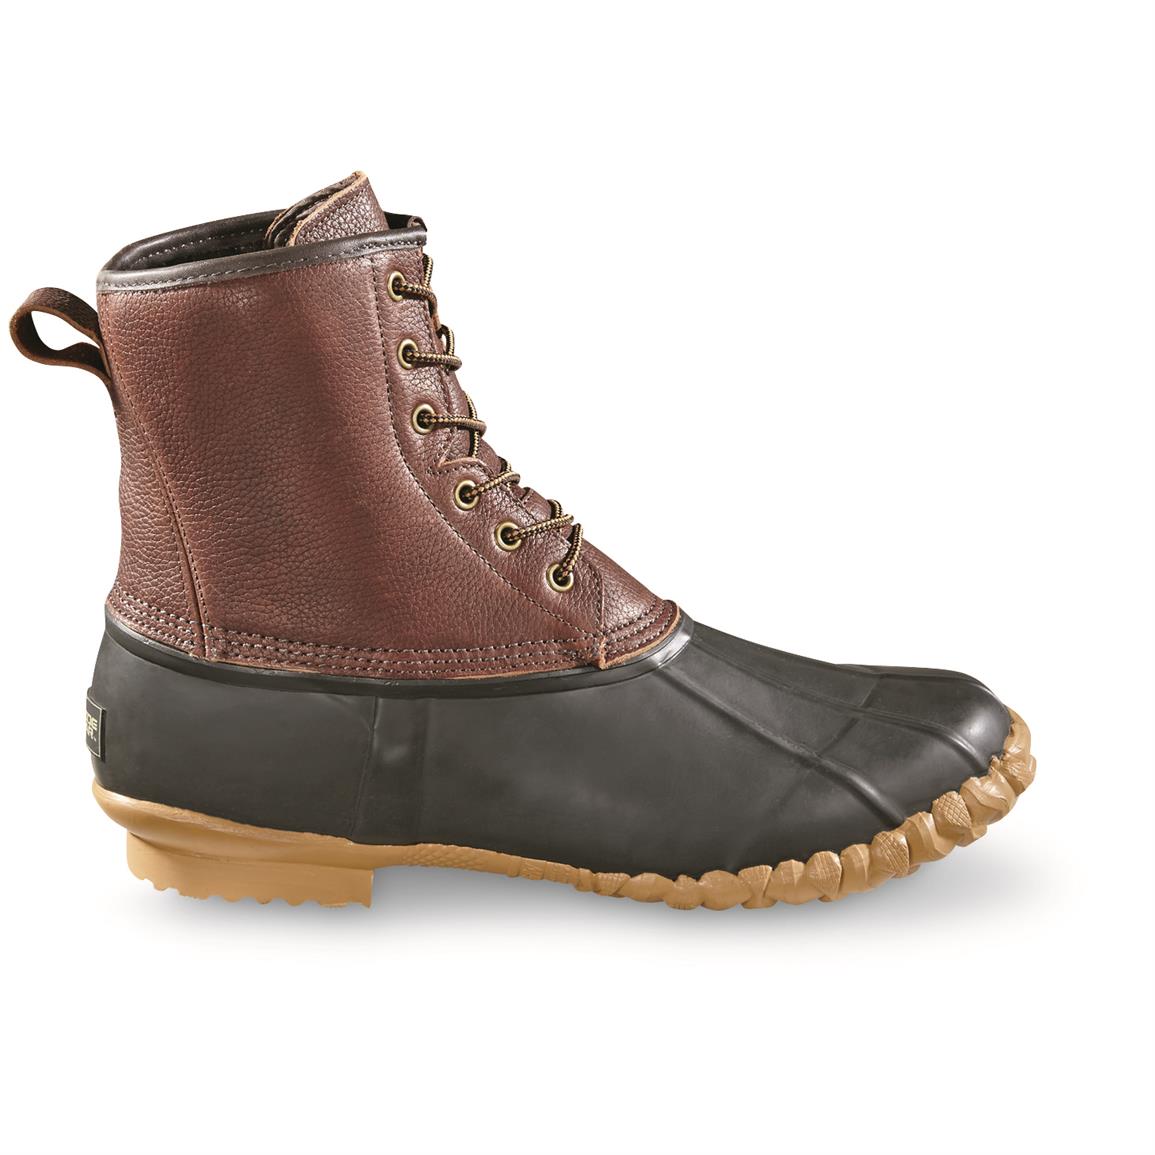 Boot Camp For Adults: Mens Thinsulate Duck Boots